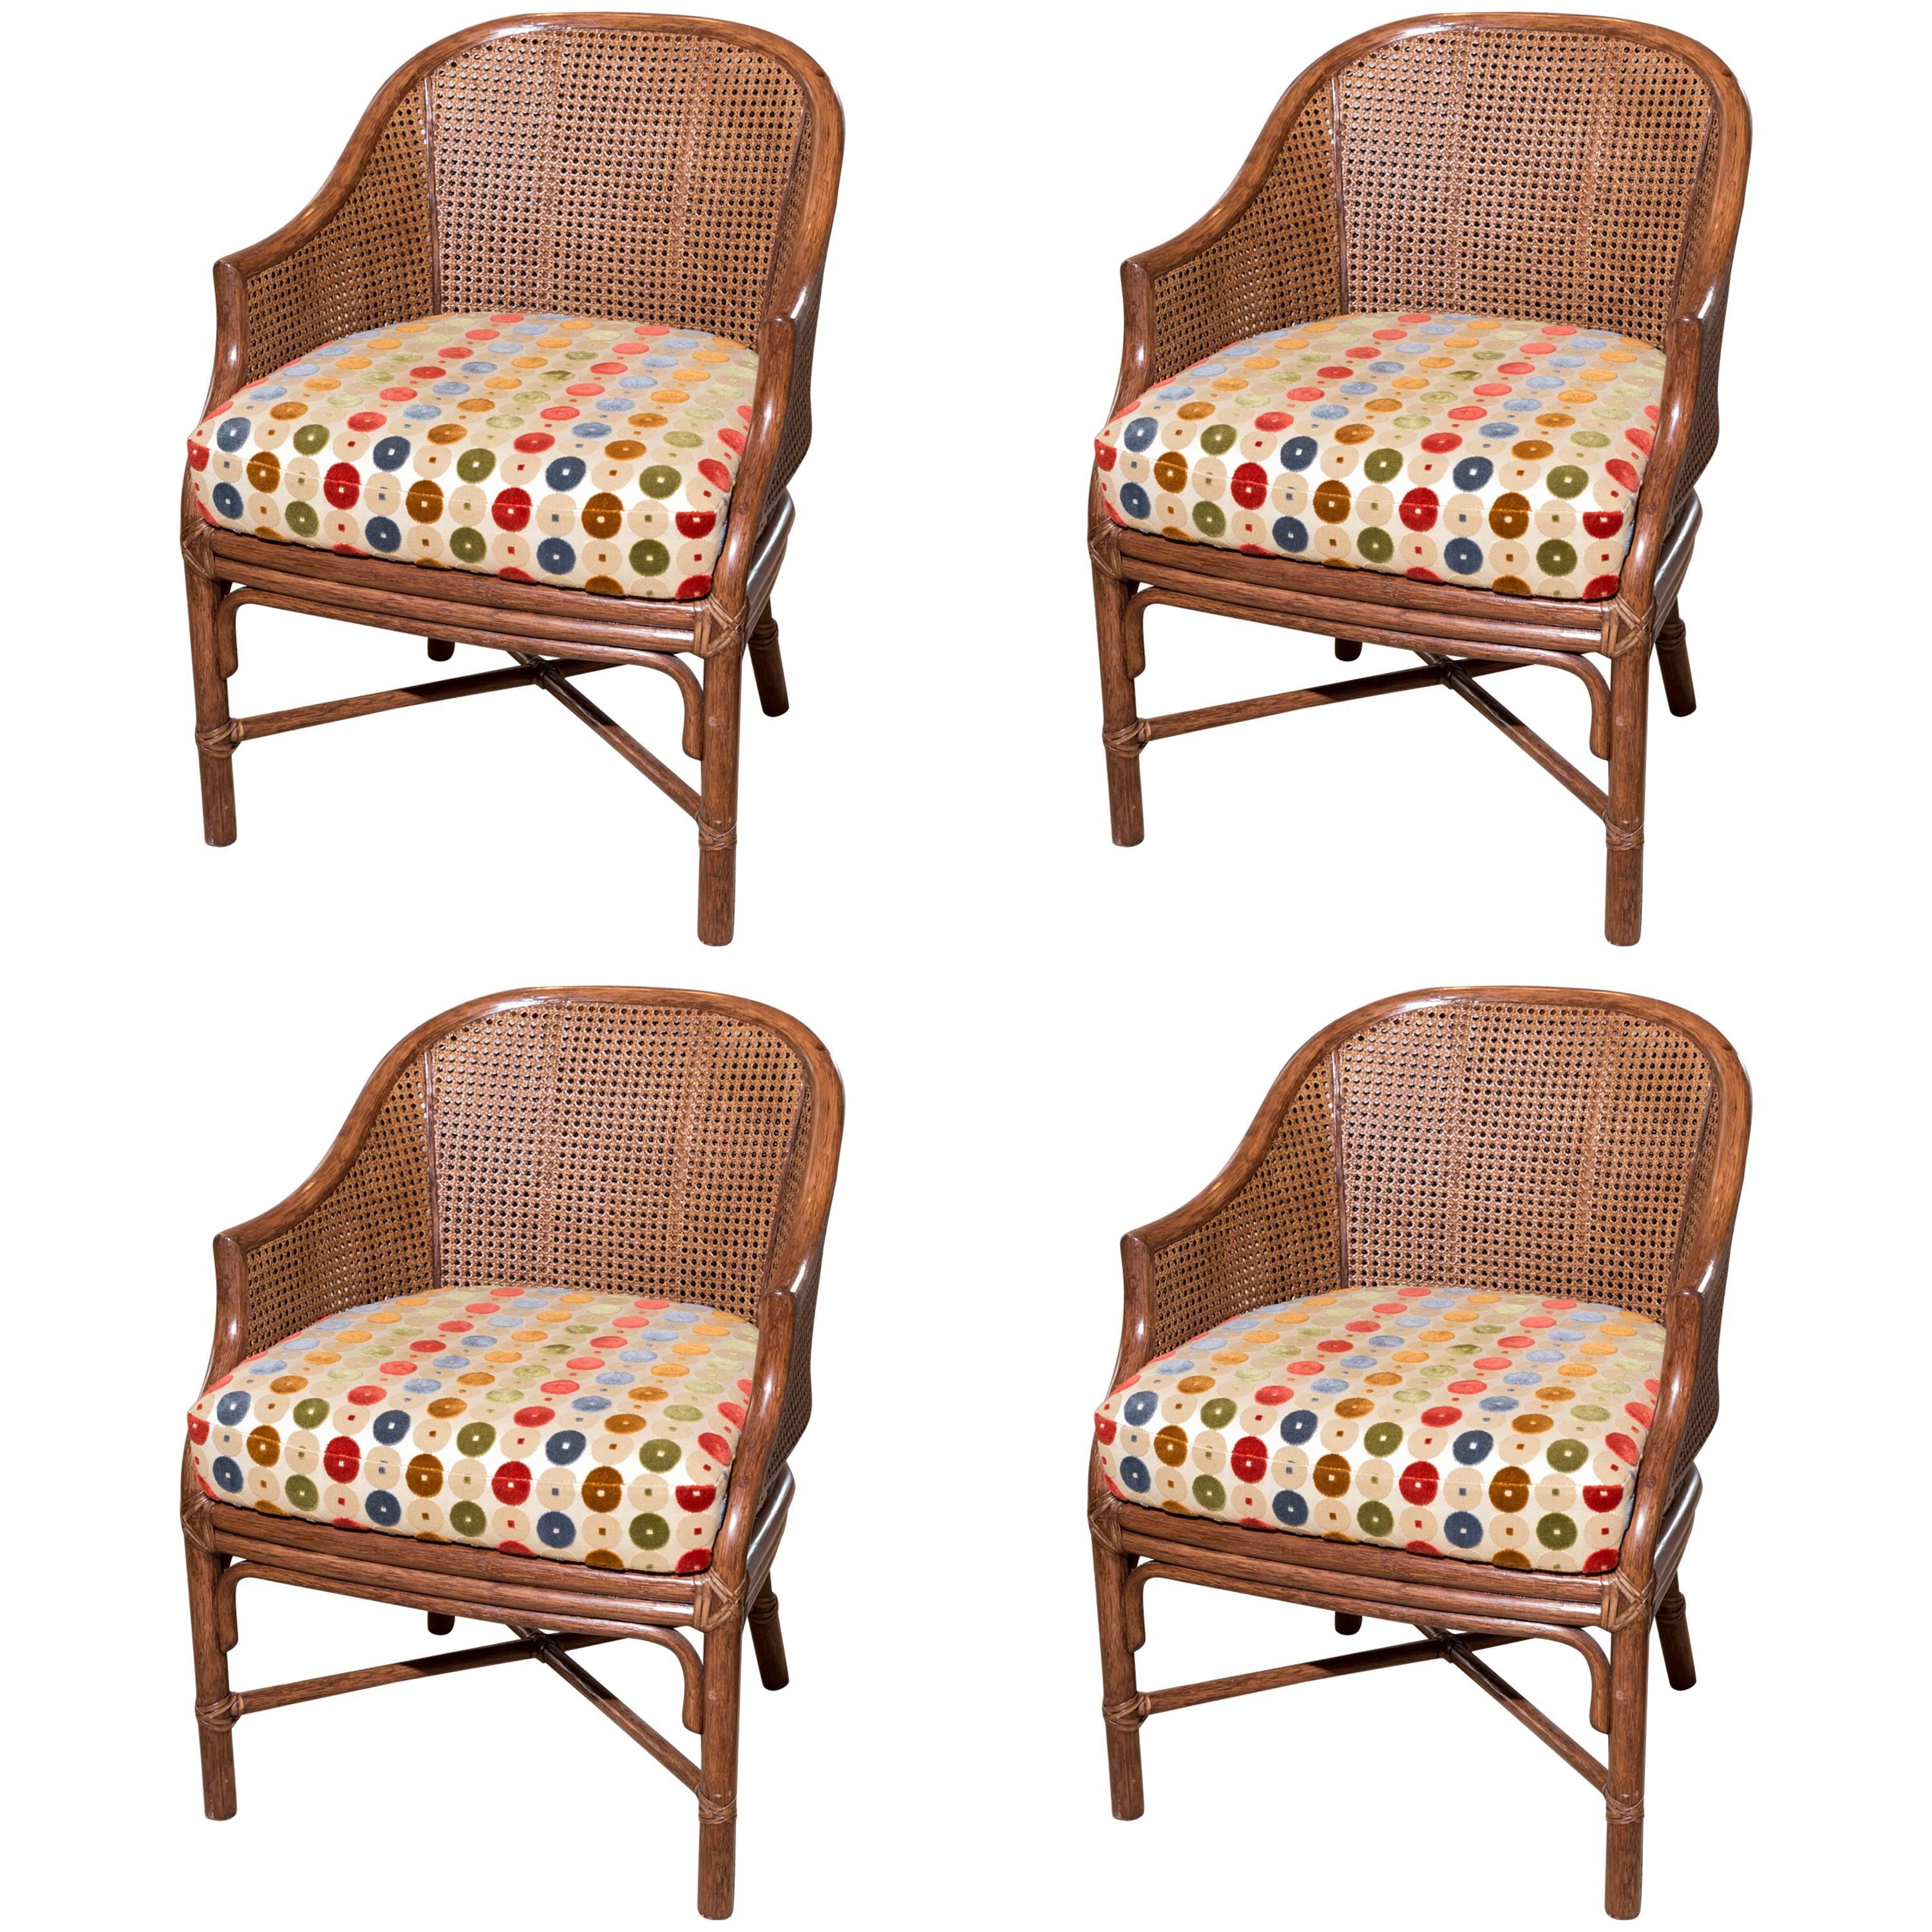 Set of Four Cane and Bamboo Barrel Back Chairs by McGuire